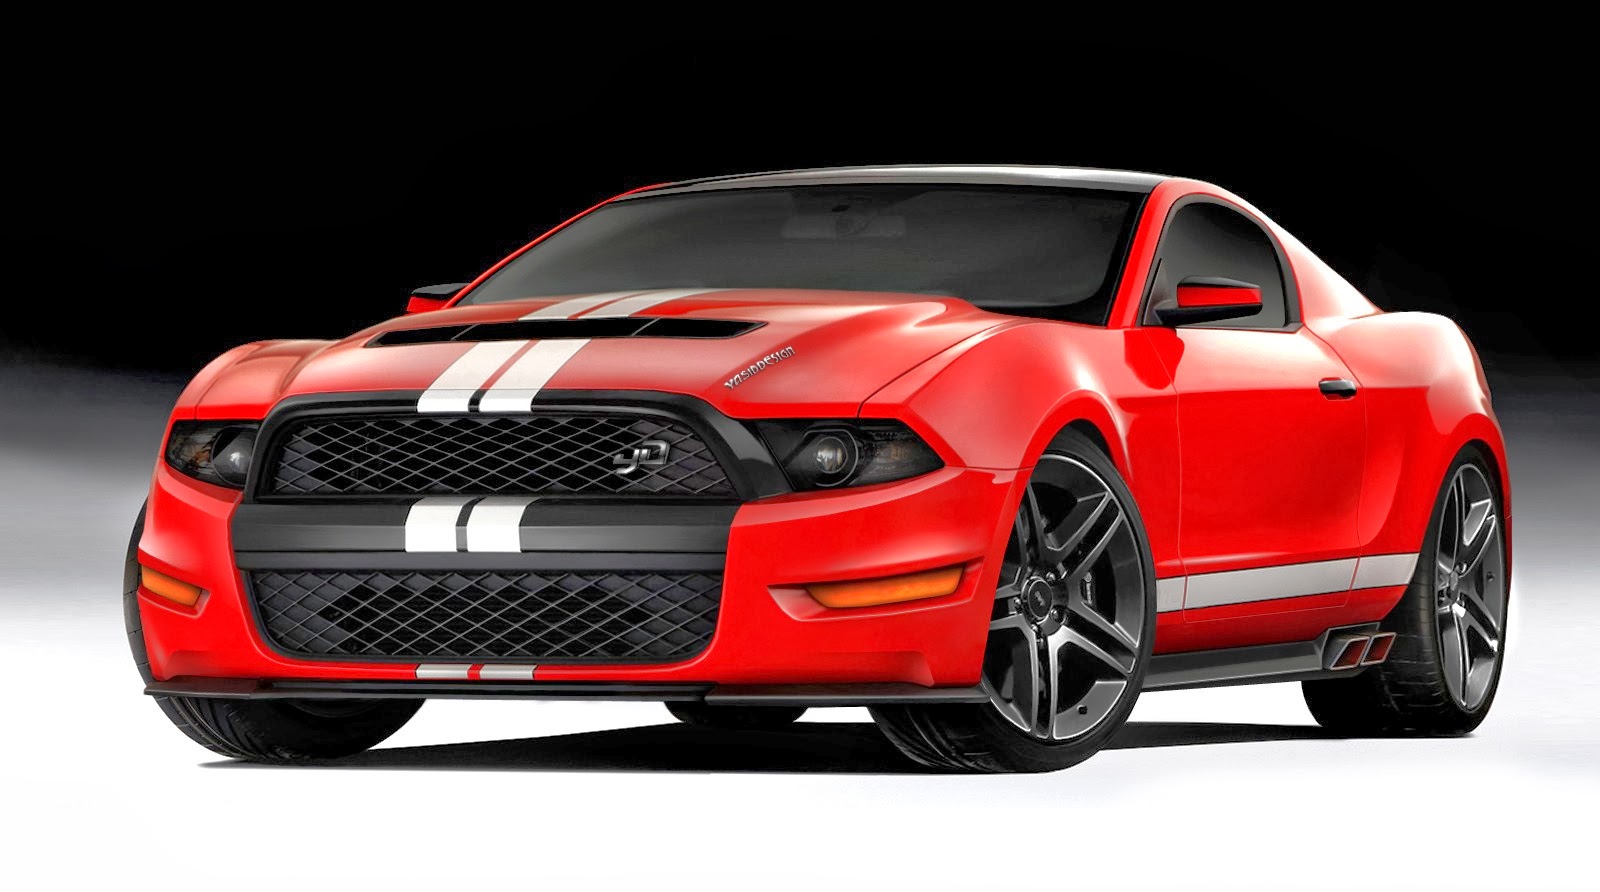 HD Wallpapers: Cars Wallpapers 2014